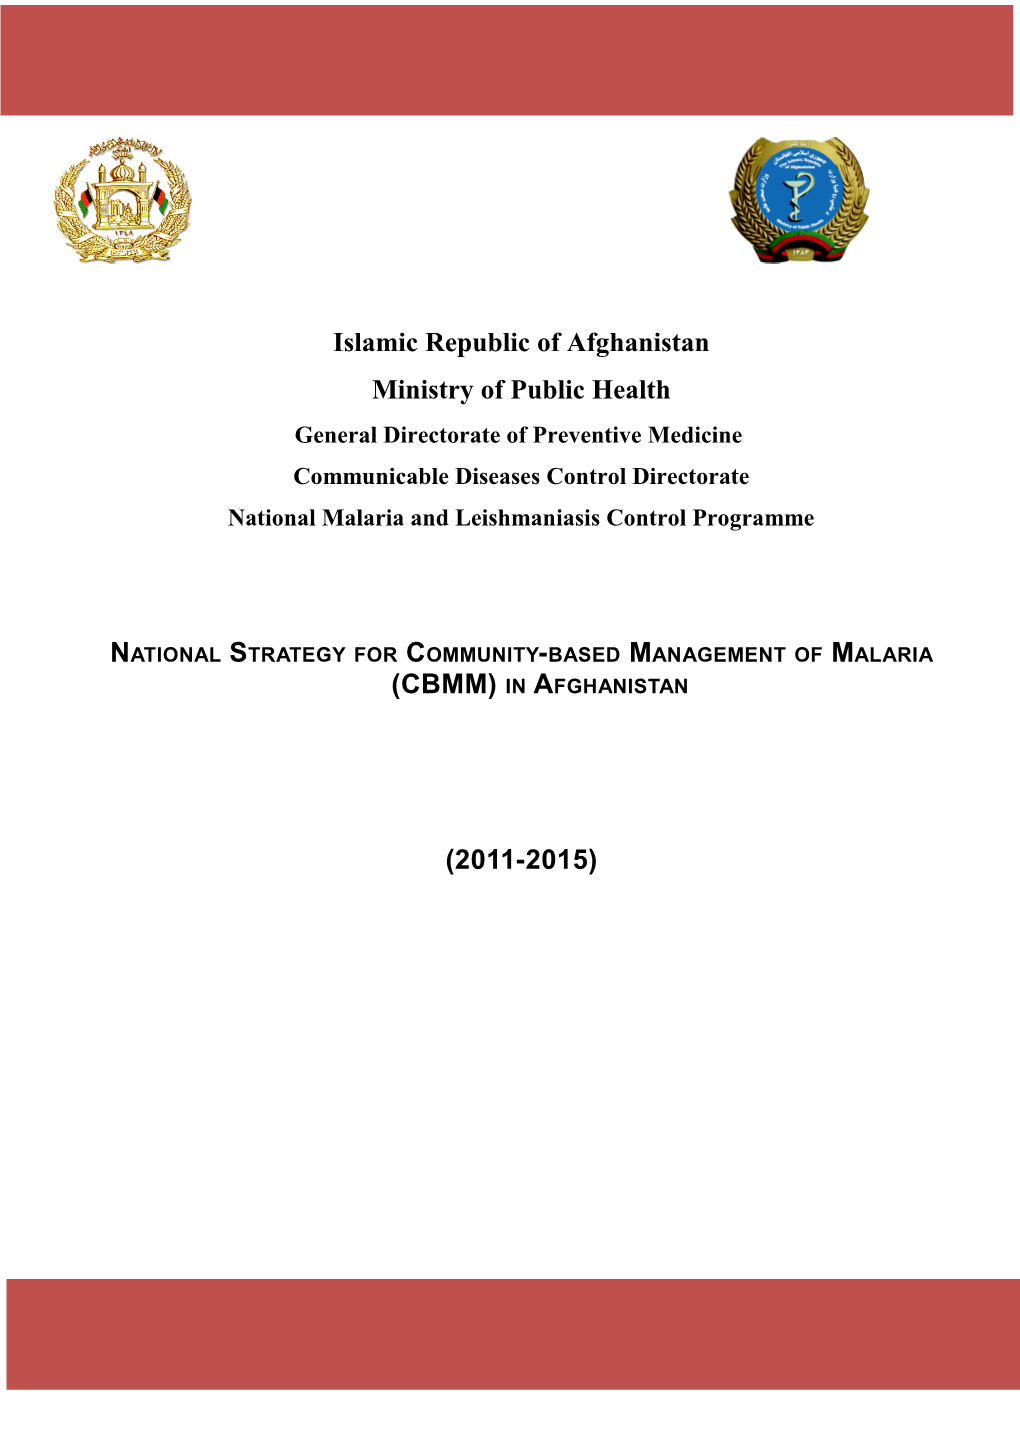 Development of the National Strategy for Community-Based Management of Malaria in Afghanistan